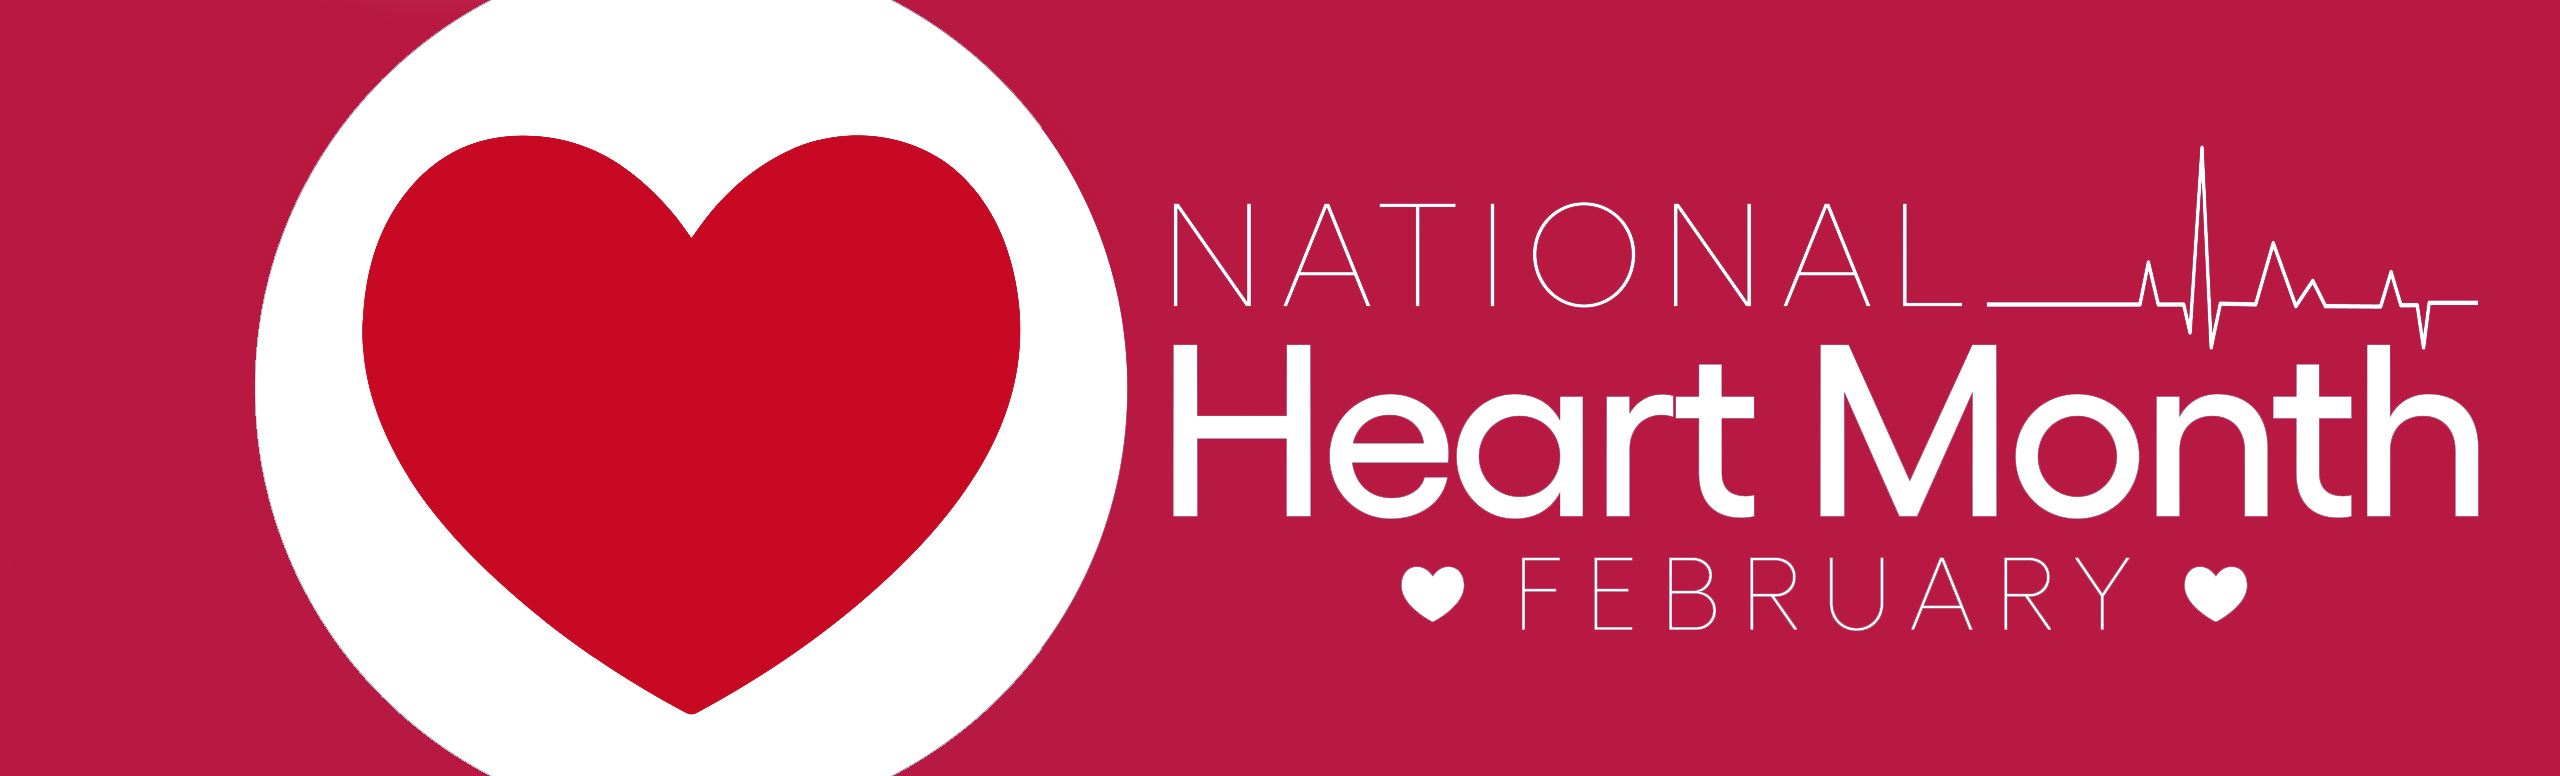 American heart month is february.